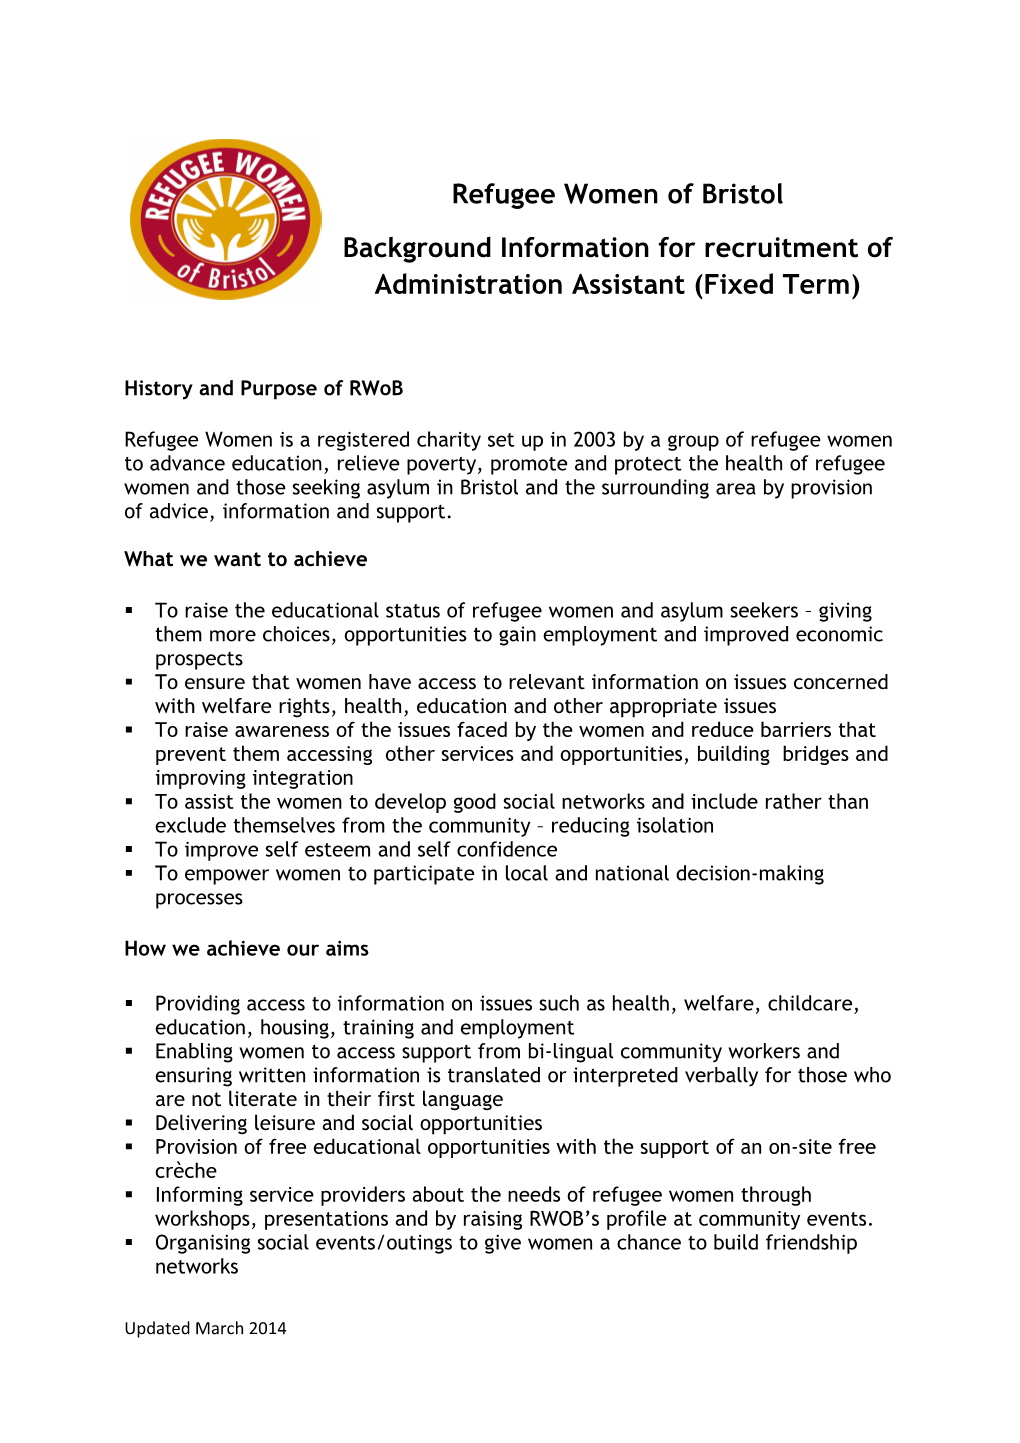 Background Information for Recruitment of Administration Assistant (Fixed Term)